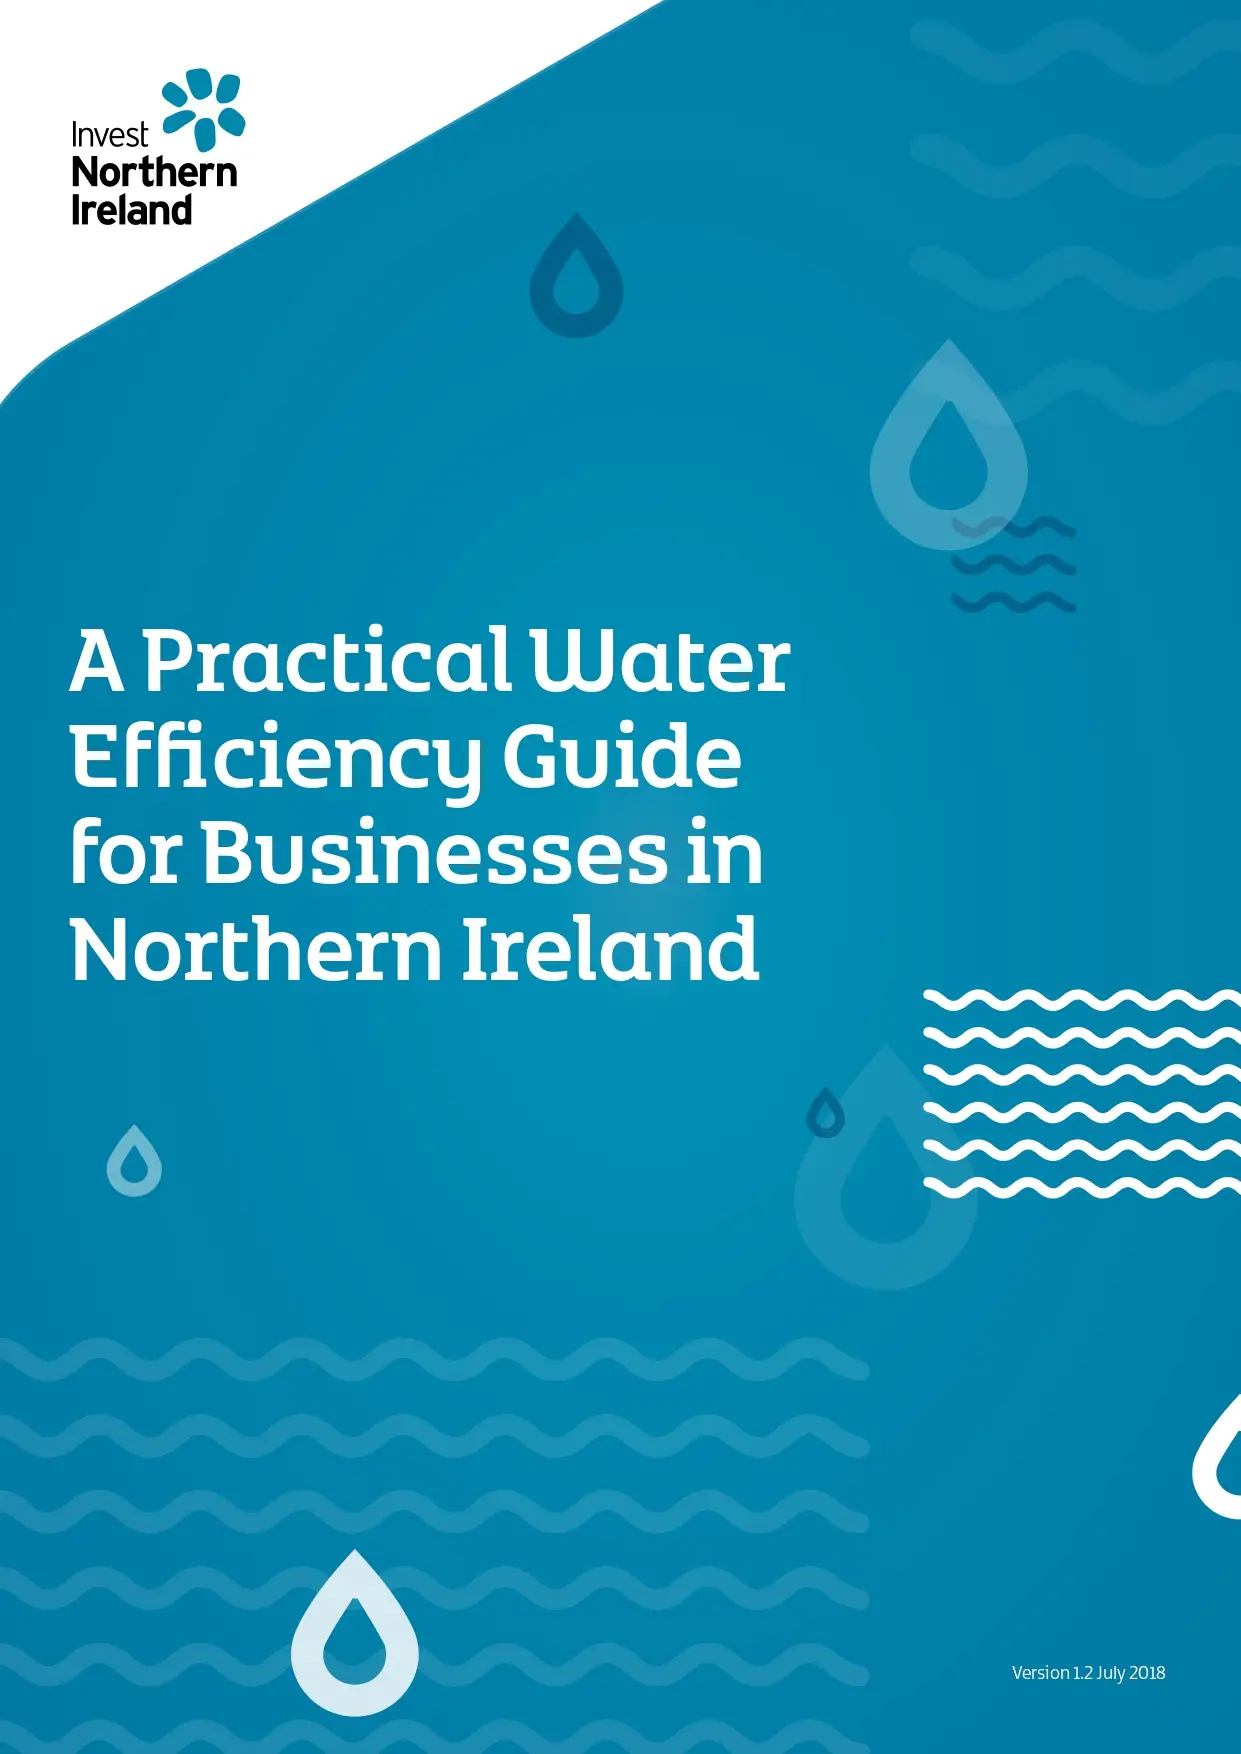 A Practical Water Efficiency Guide for Businesses in Northern Ireland